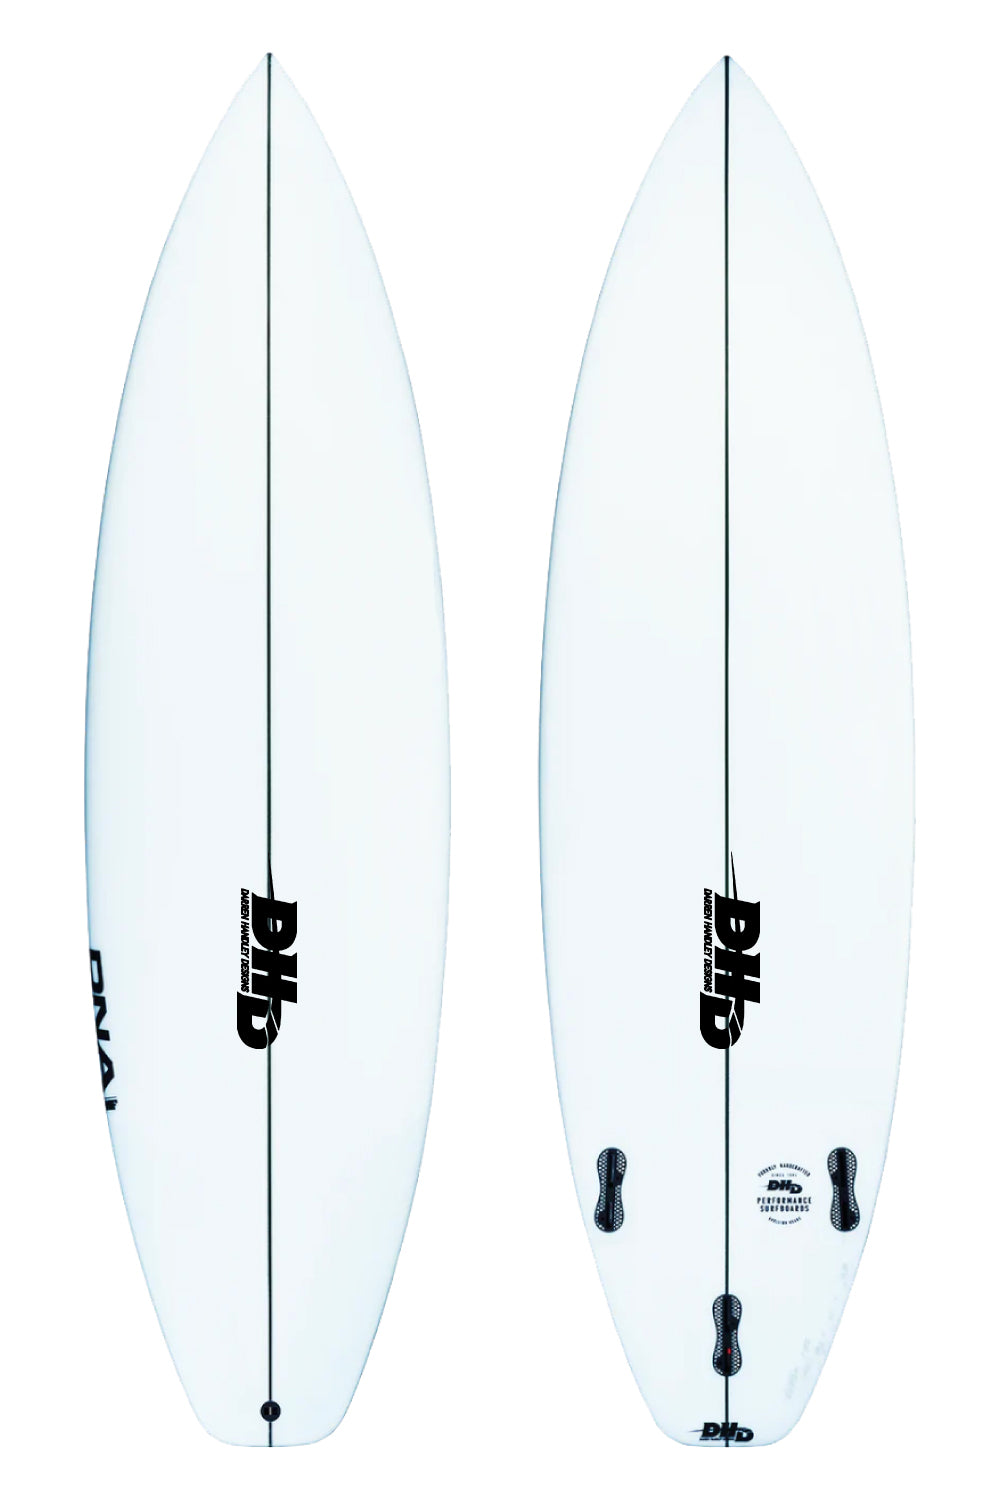 DHD Ethan Ewing DNA Surfboard